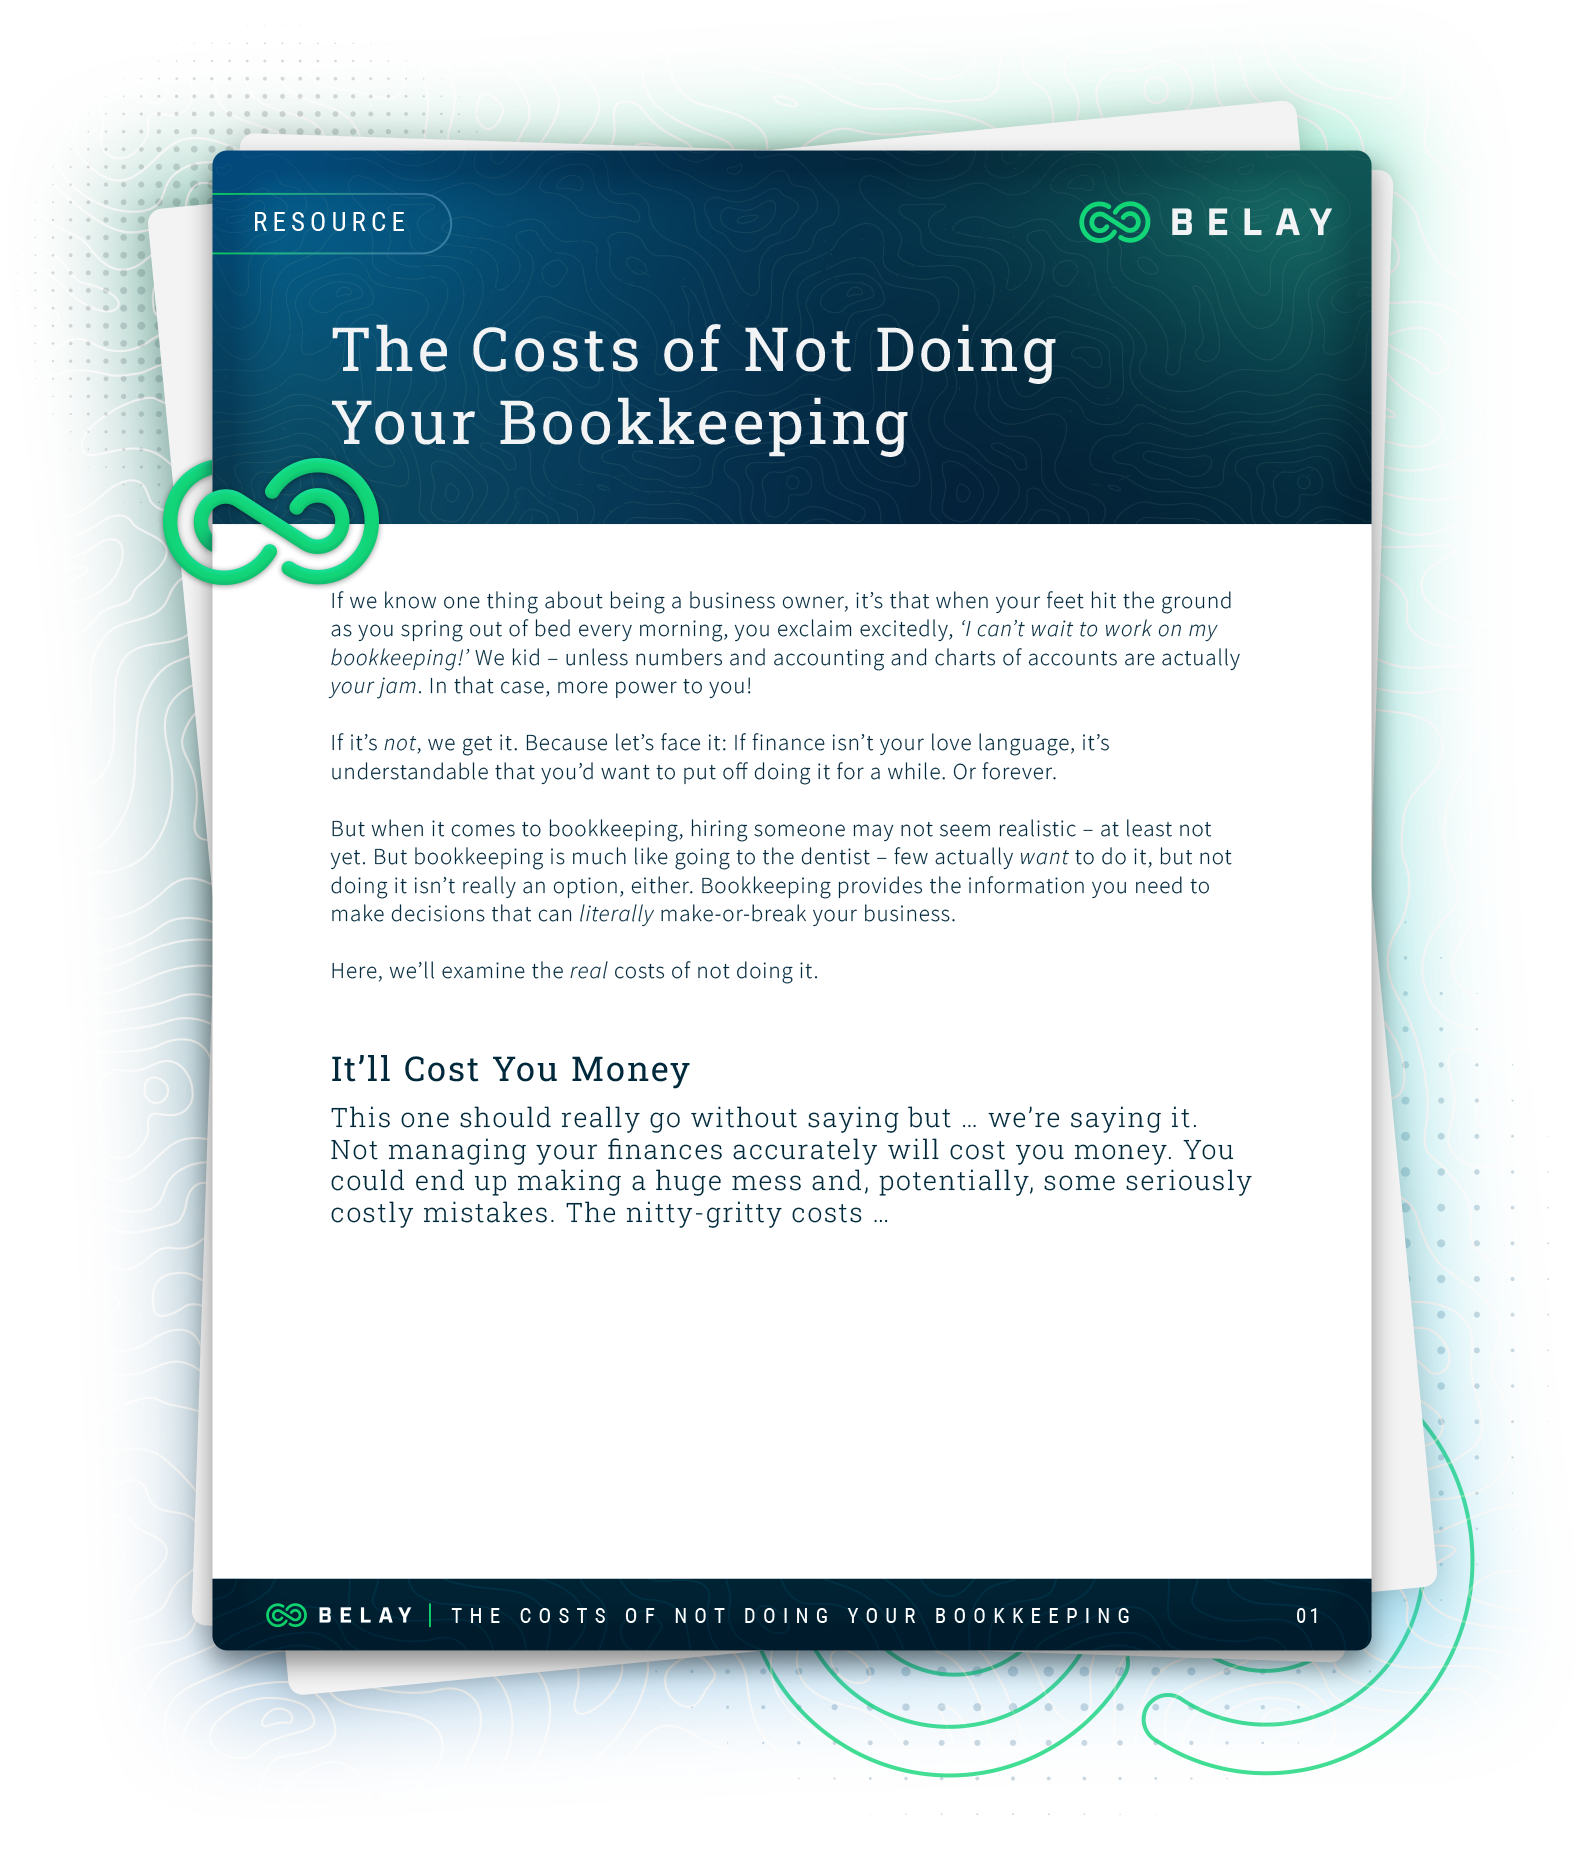 The Costs of Not Doing Your Bookkeeping